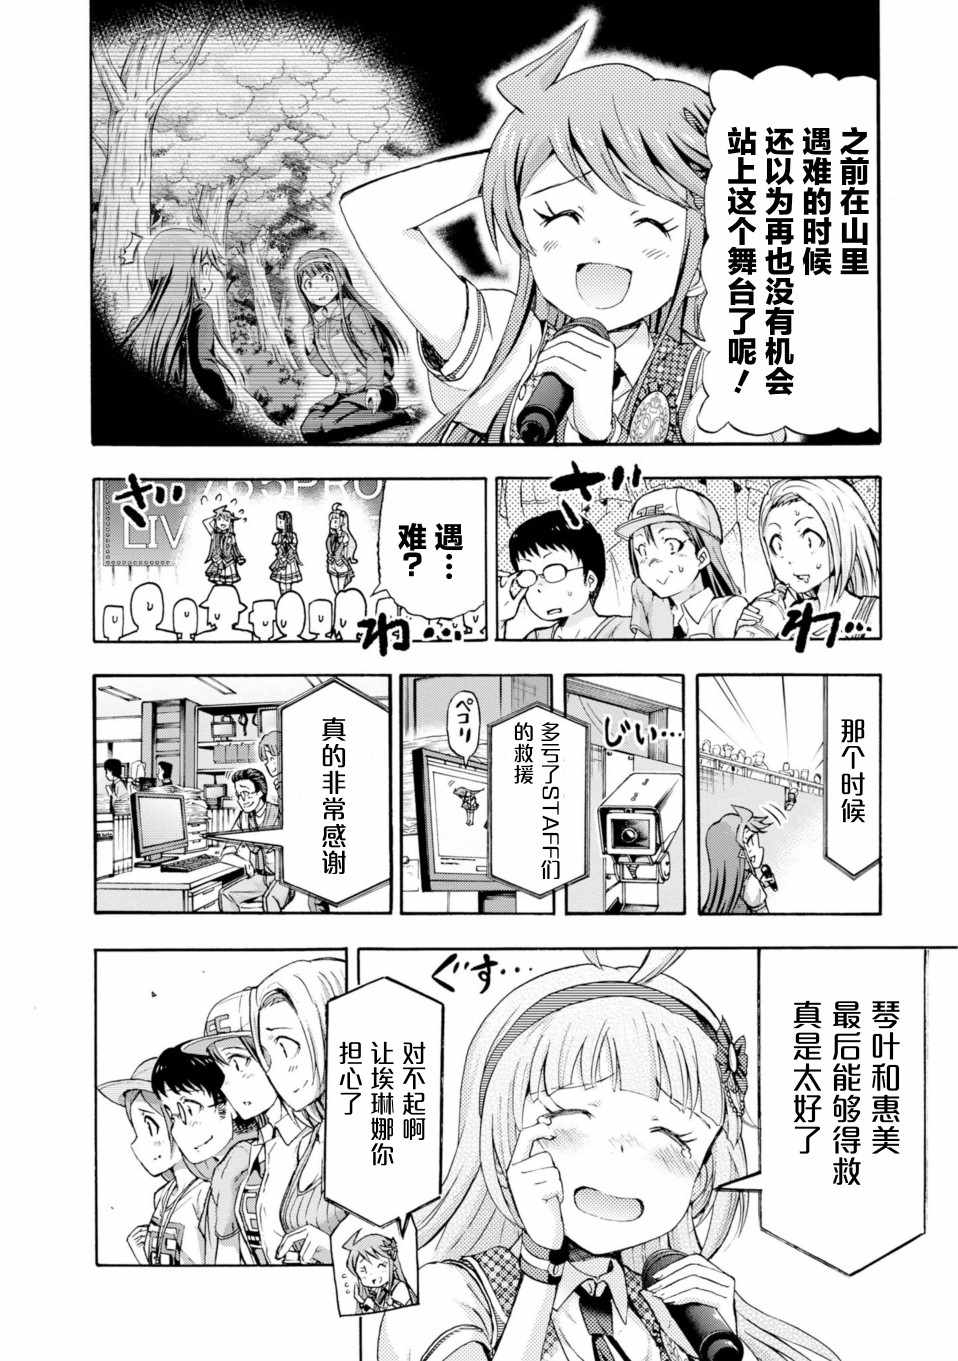 《THE IDOLM@STER MILLION LIVE! Blooming Clover》漫画 Blooming Clover 017集